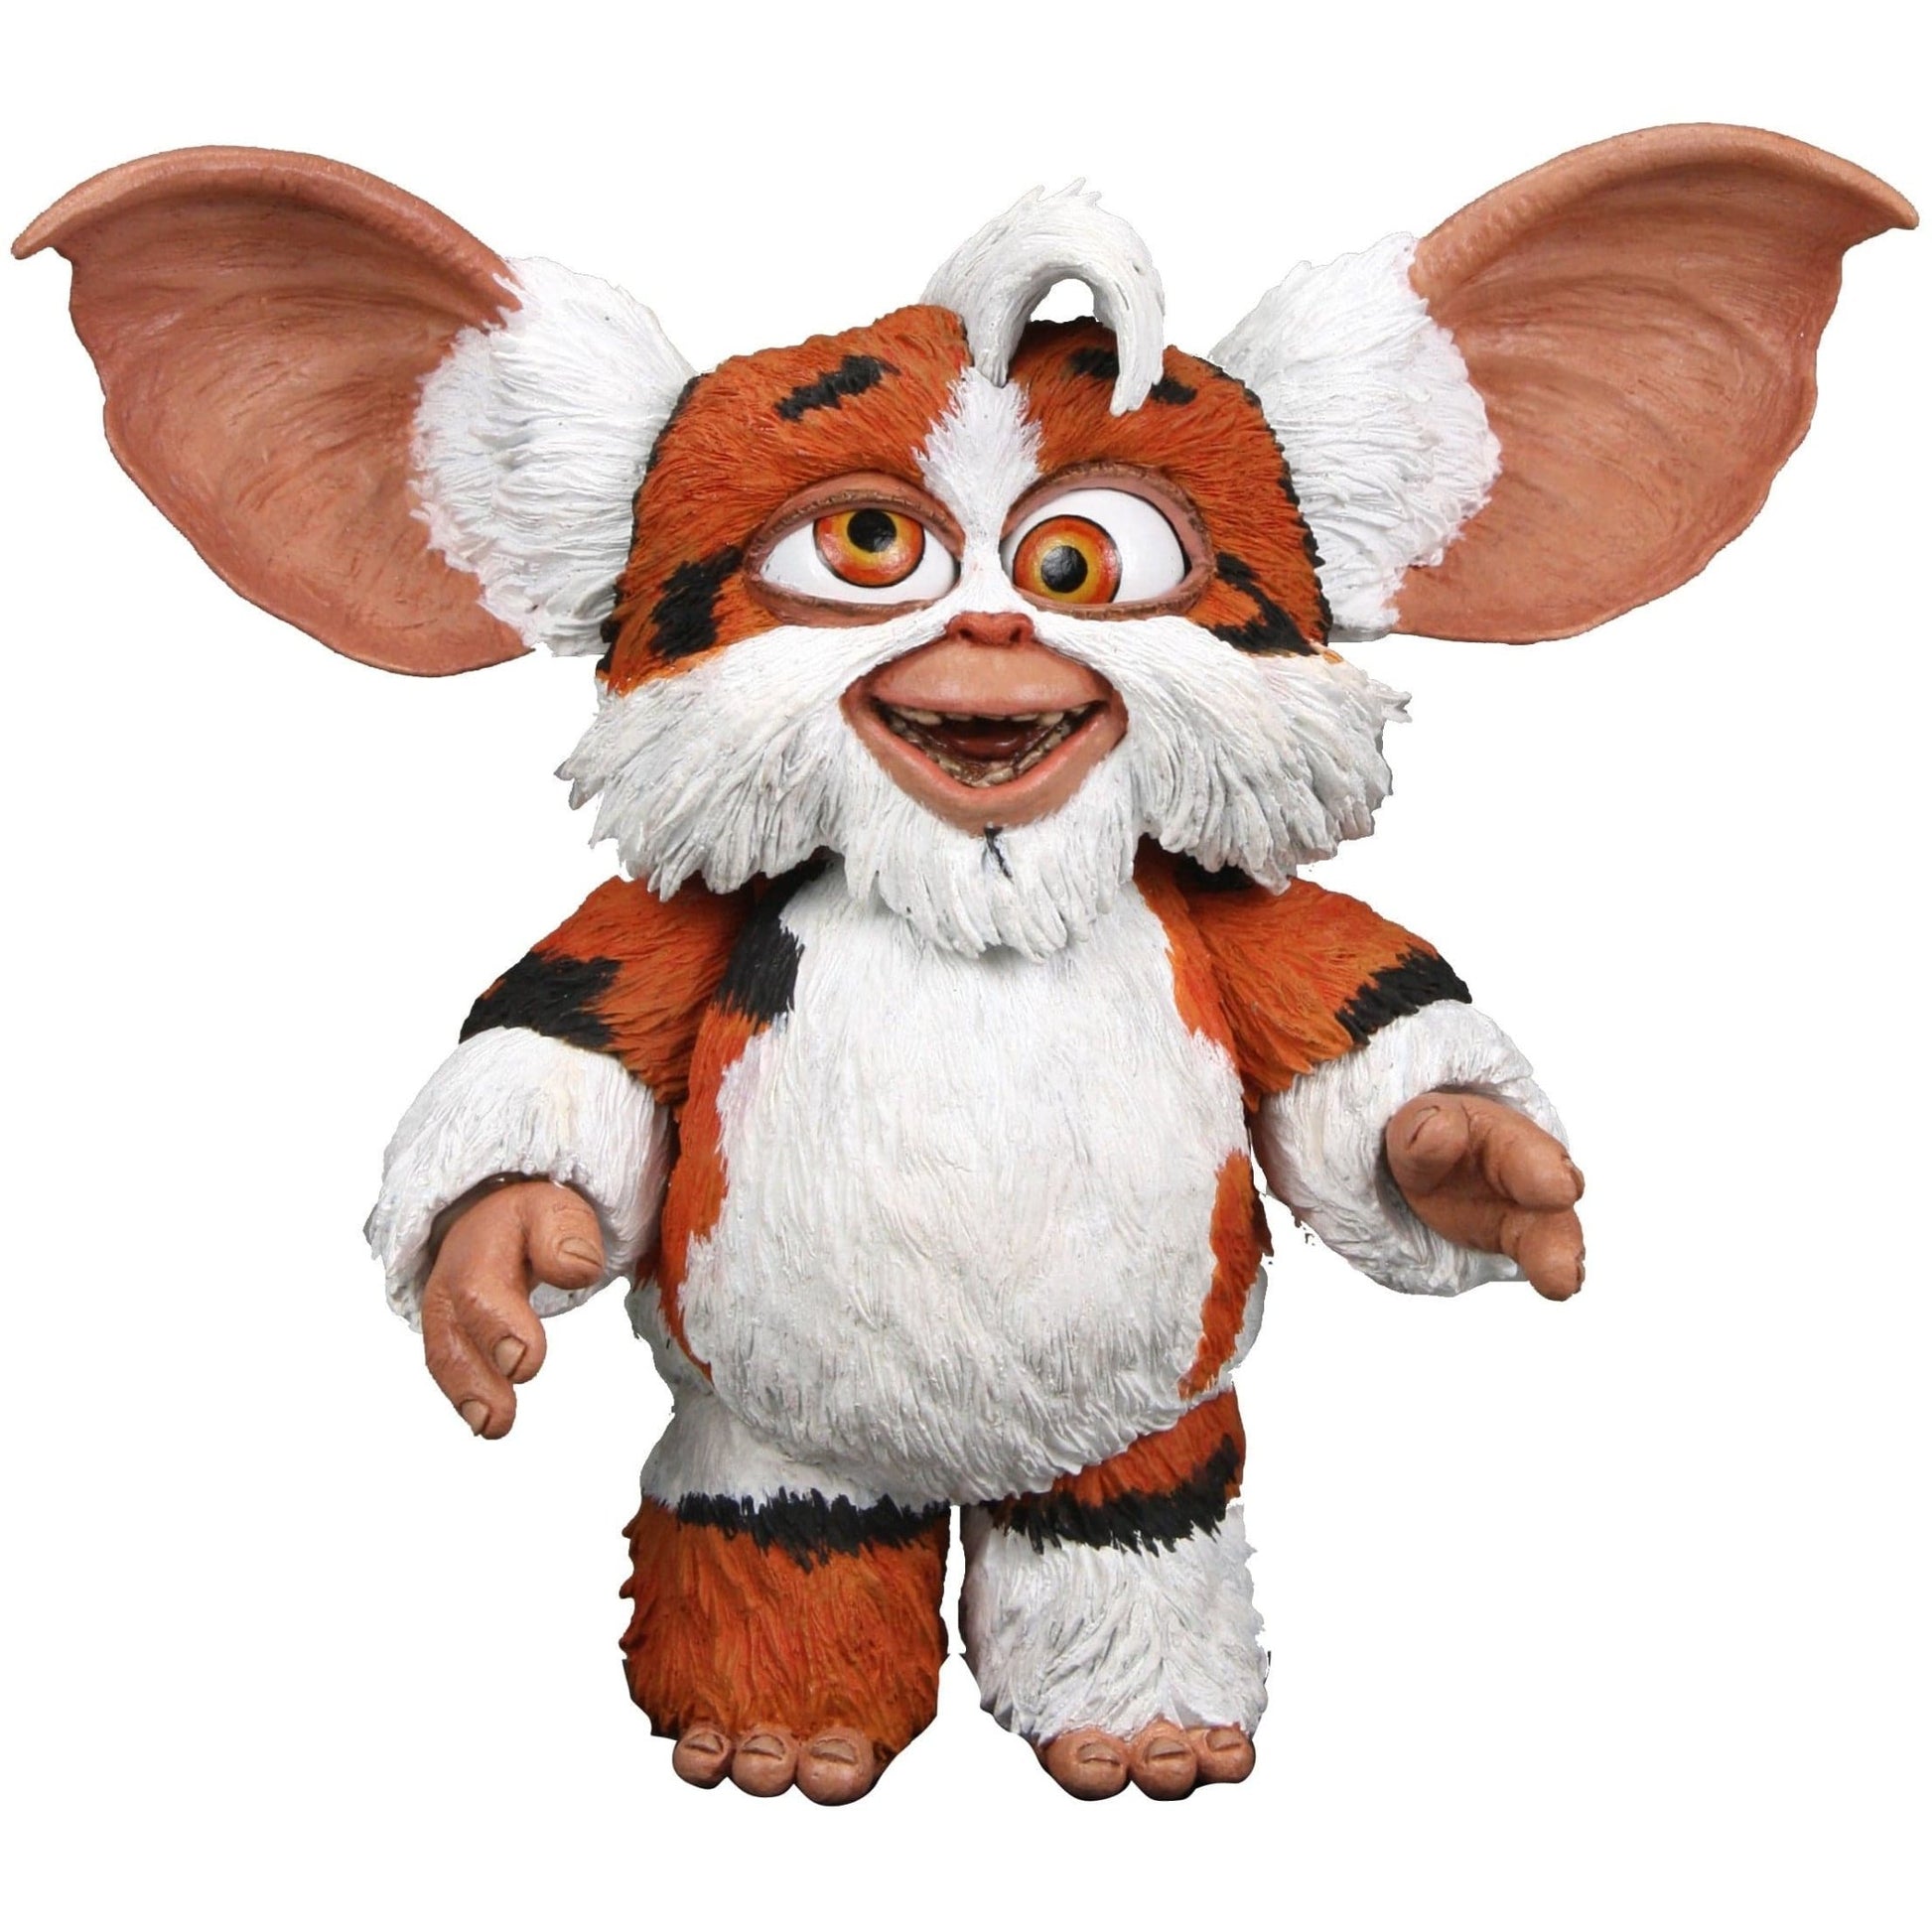 NECA Gremlins Mogwai in Blister Card 7 Inch Action Figures - Redshift7toys.com